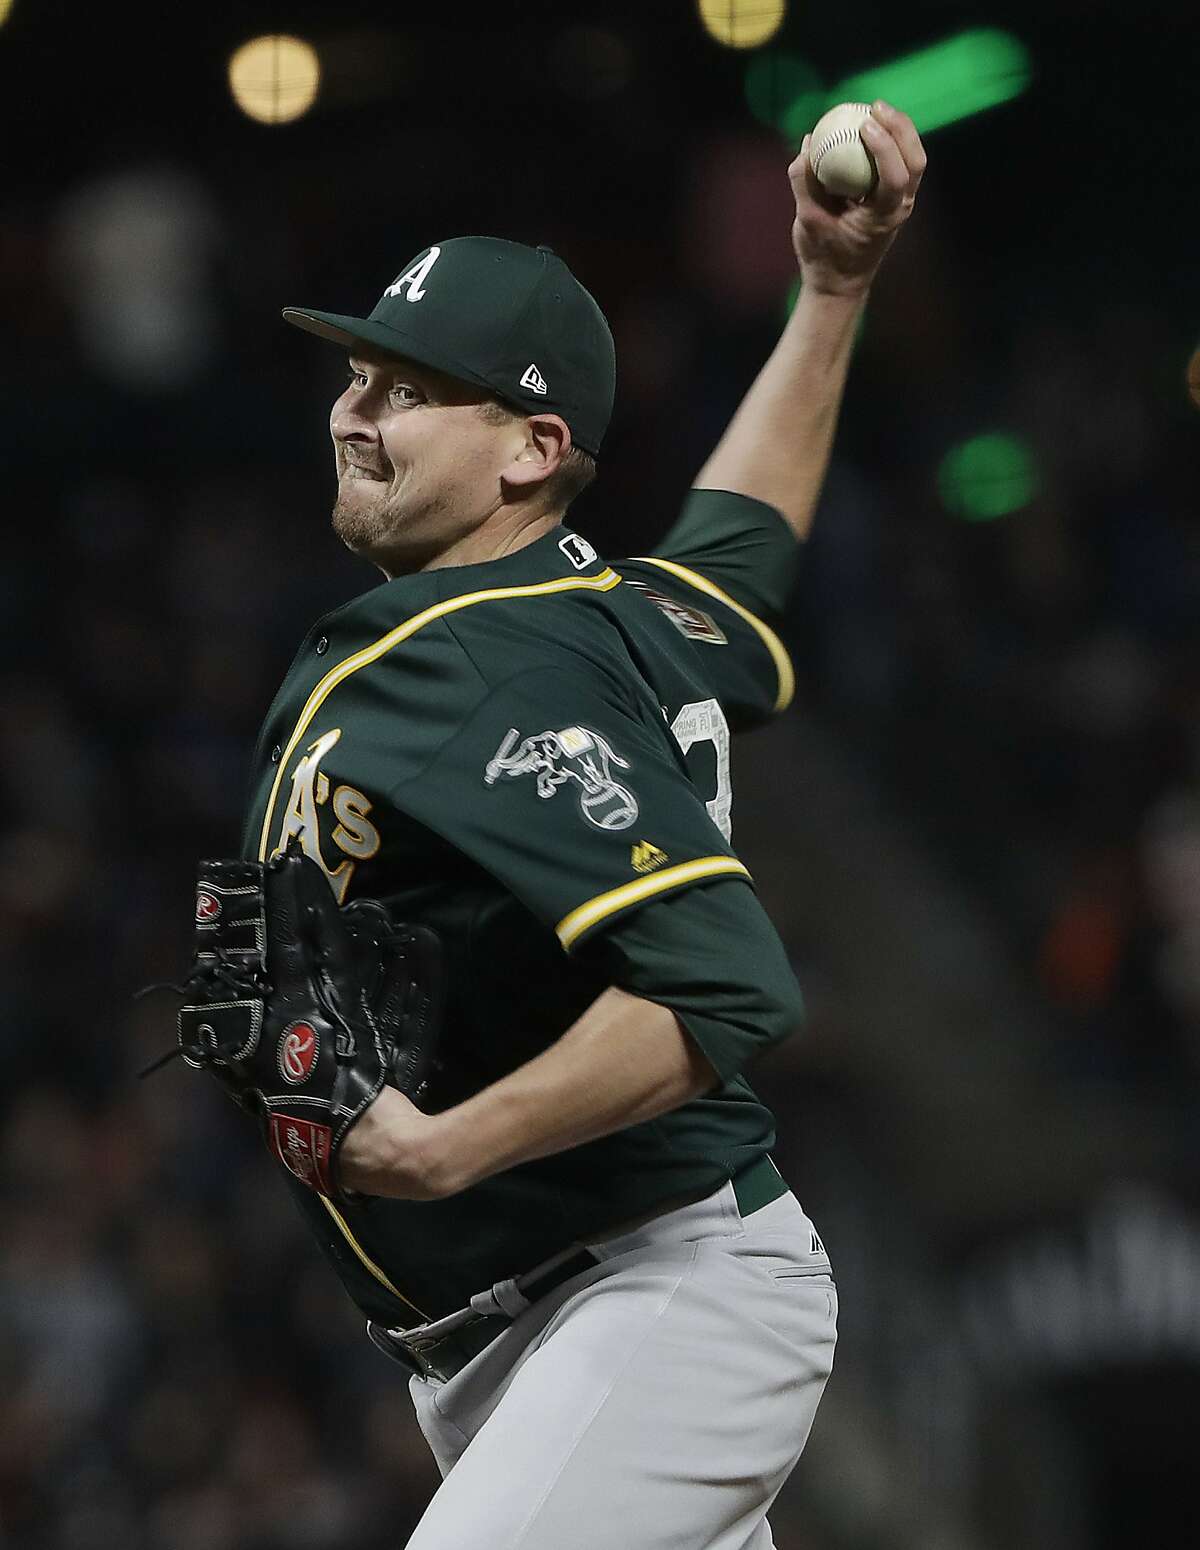 Oakland Athletics pitcher Trevor Cahill against the San Francisco Giants during a spring baseball game in San Francisco, Tuesday, March 27, 2018. (AP Photo/Jeff Chiu)